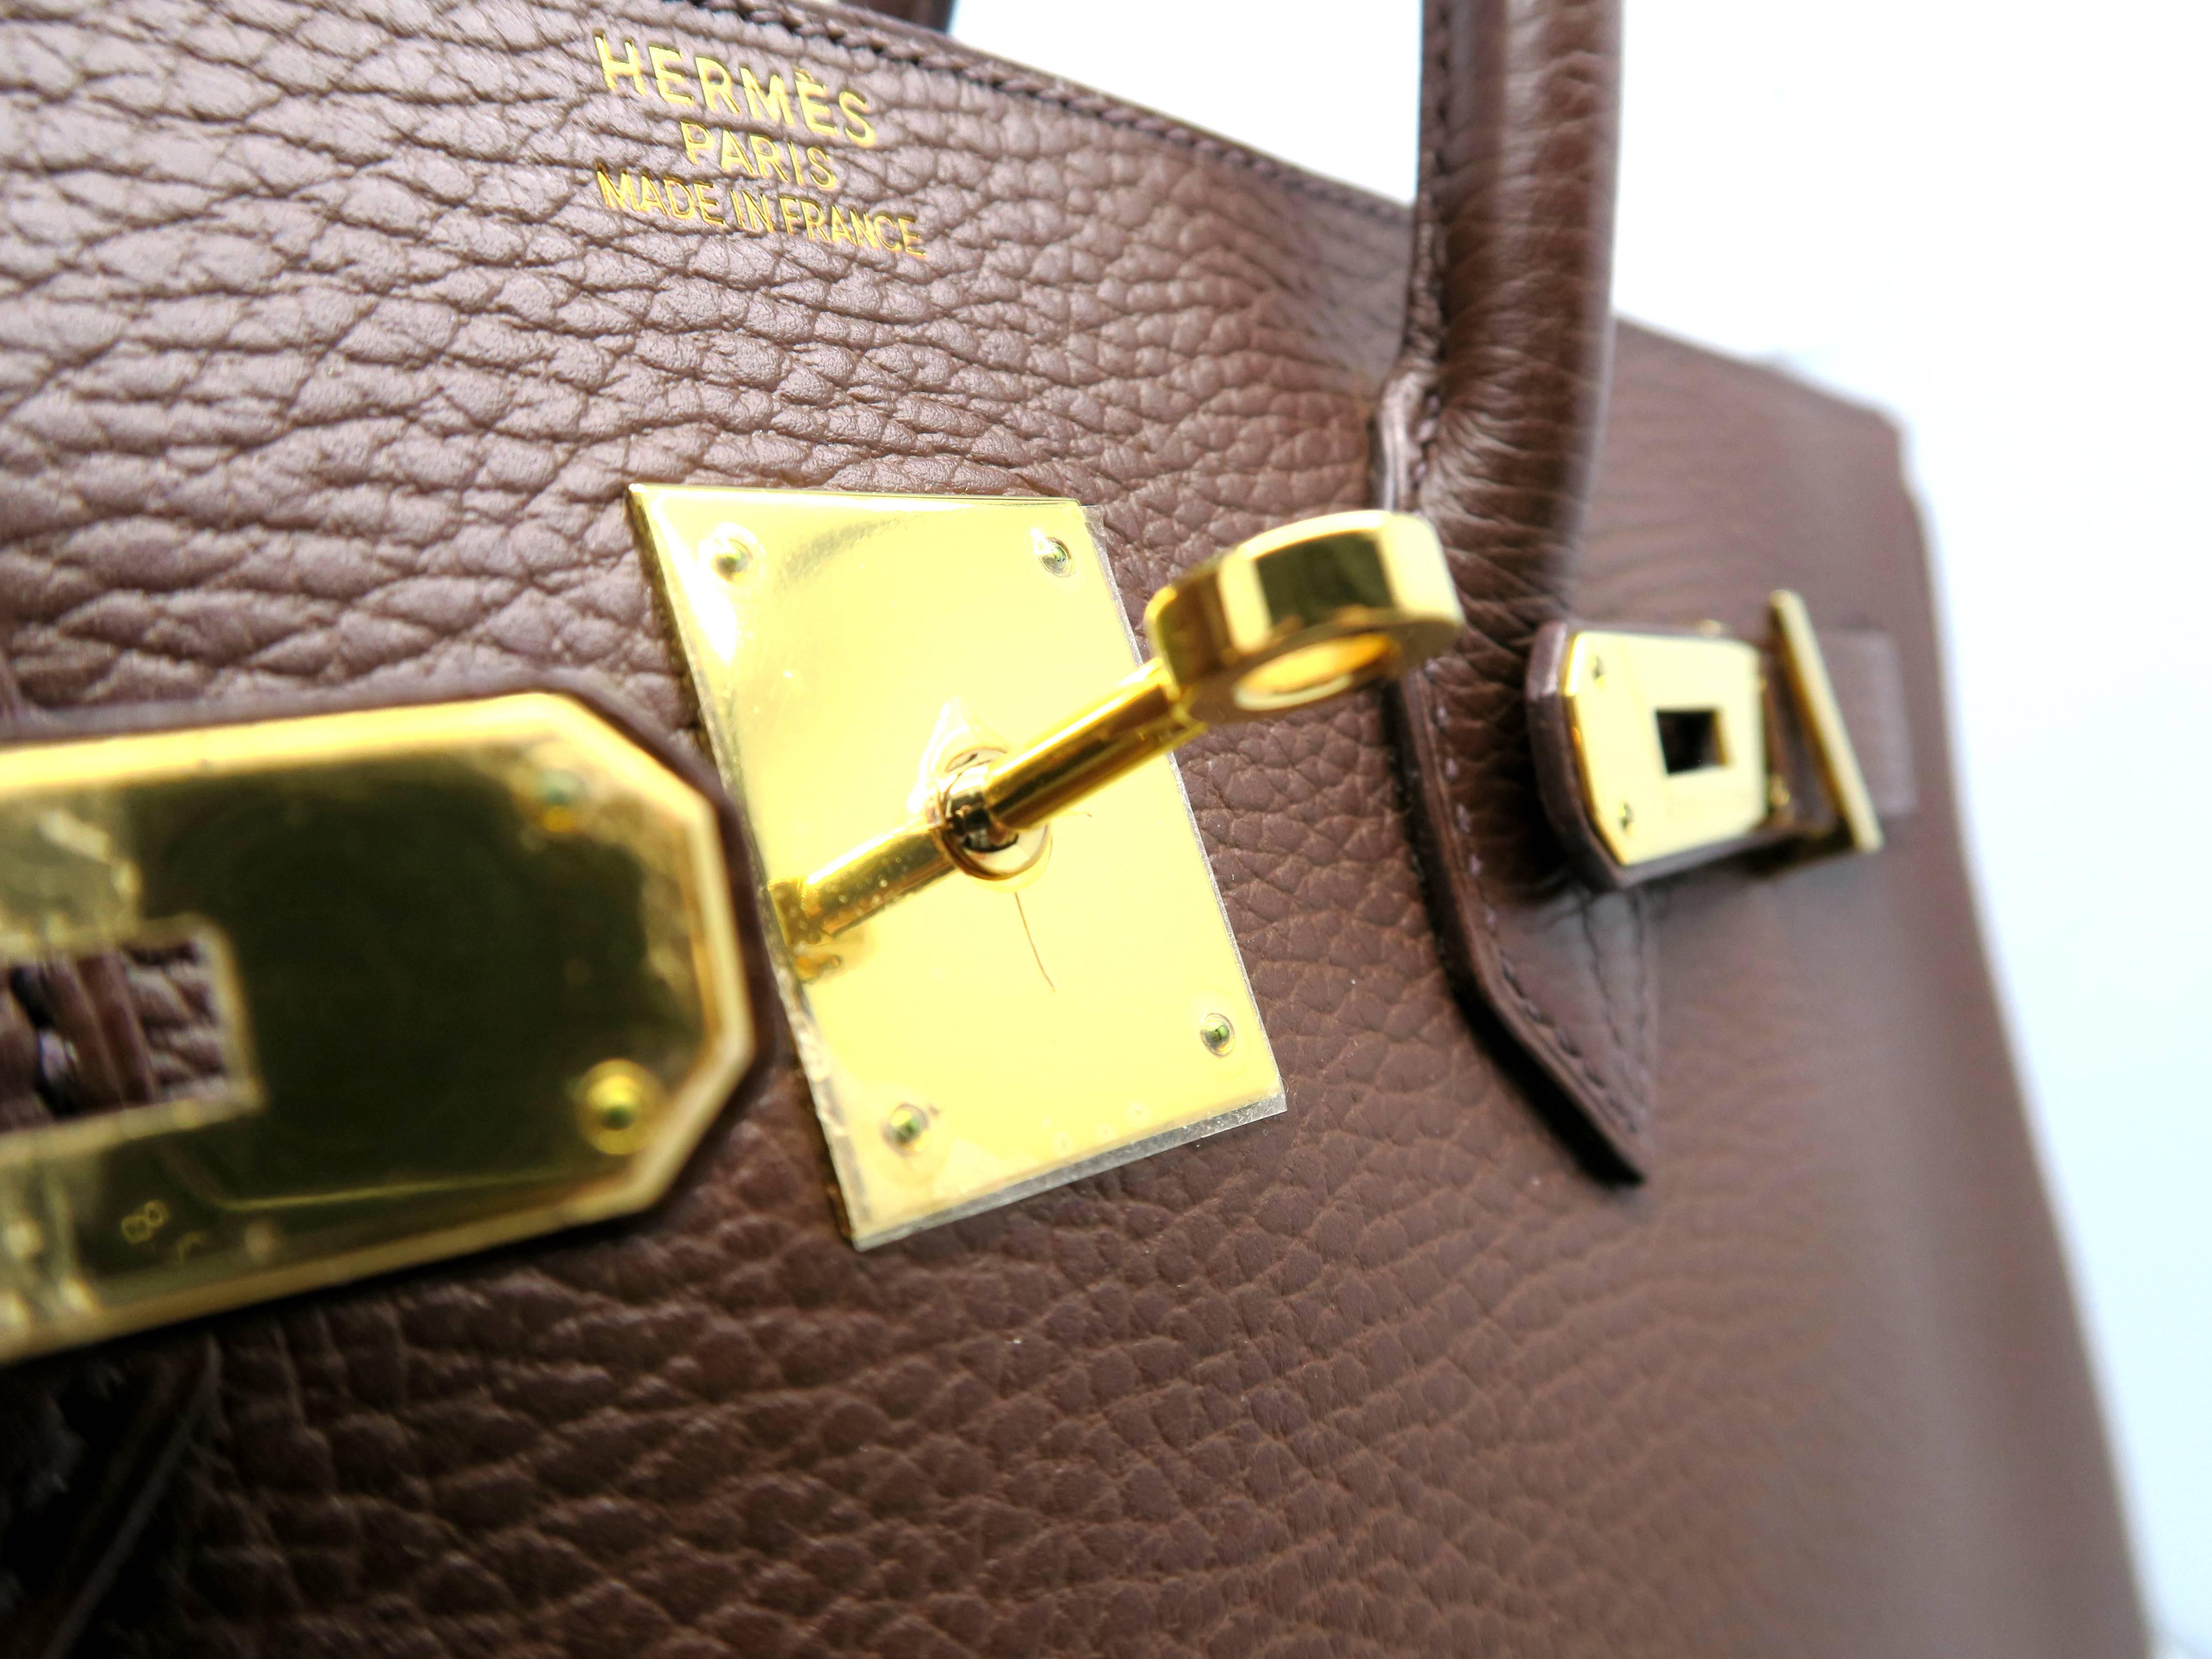 Hermes Birkin 35 Chocolat Brown Ardennes Leather GHW Top Handle Bag In Good Condition For Sale In Kowloon, HK